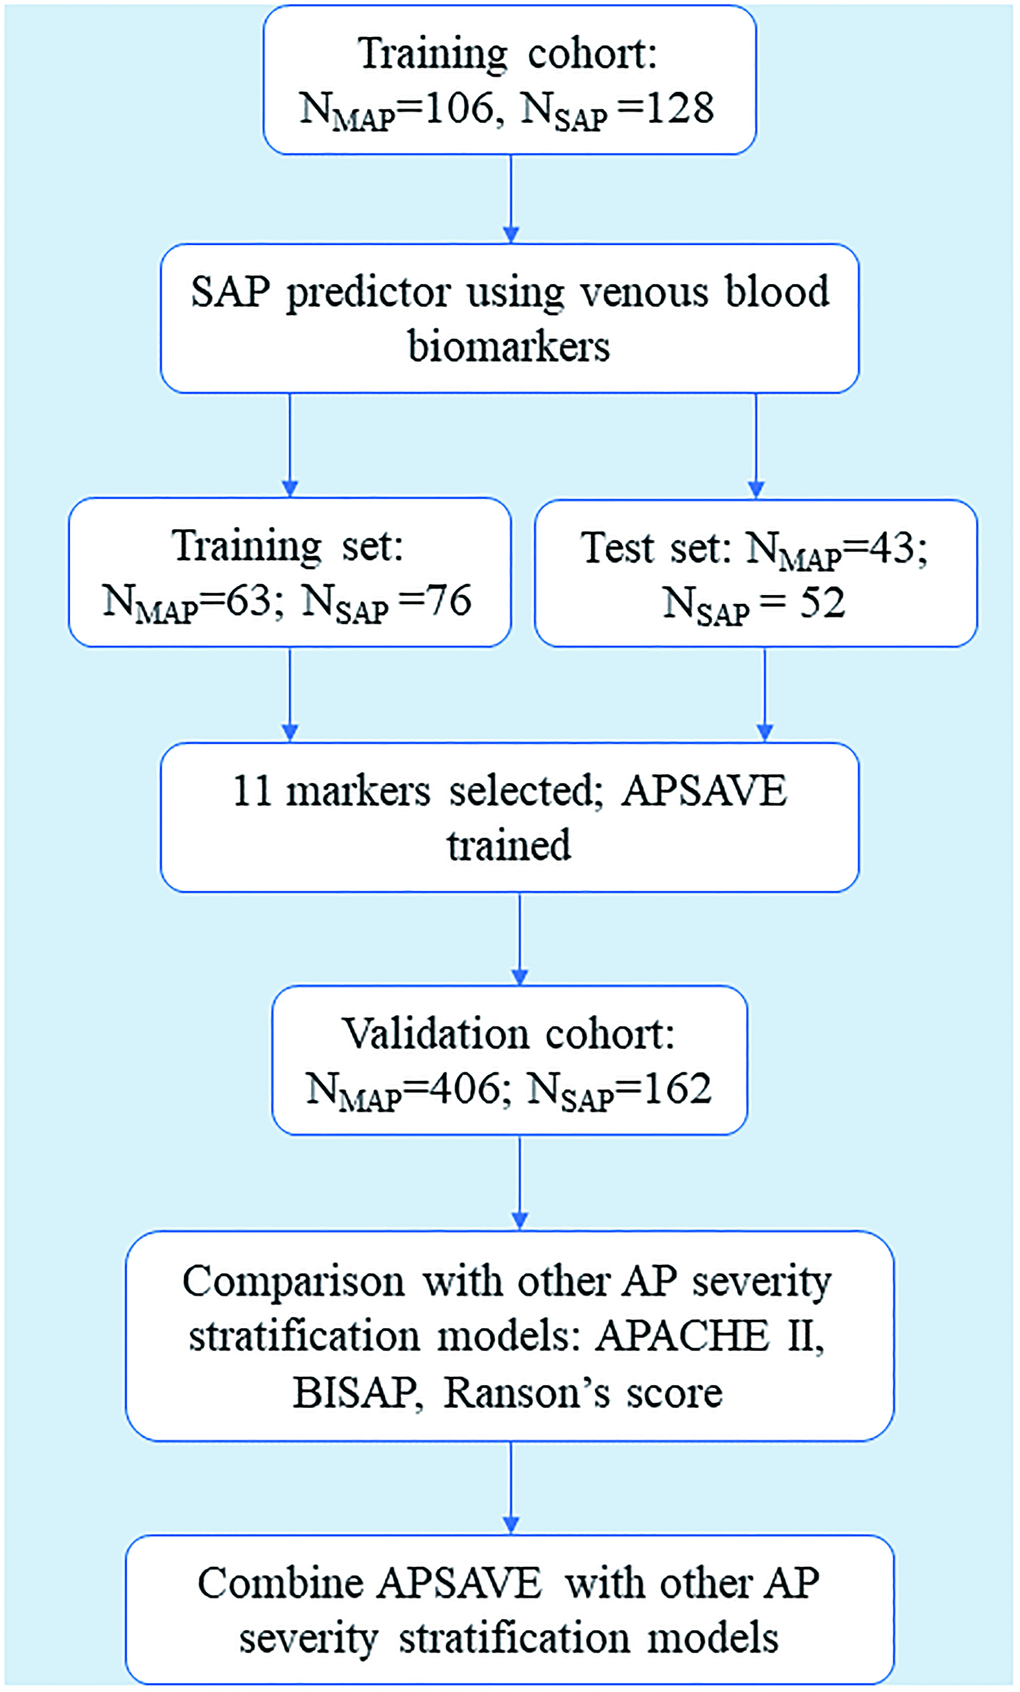 Flowchart of the training and validation of APSAVE, an AP severity stratification model based on venous blood biomarkers.